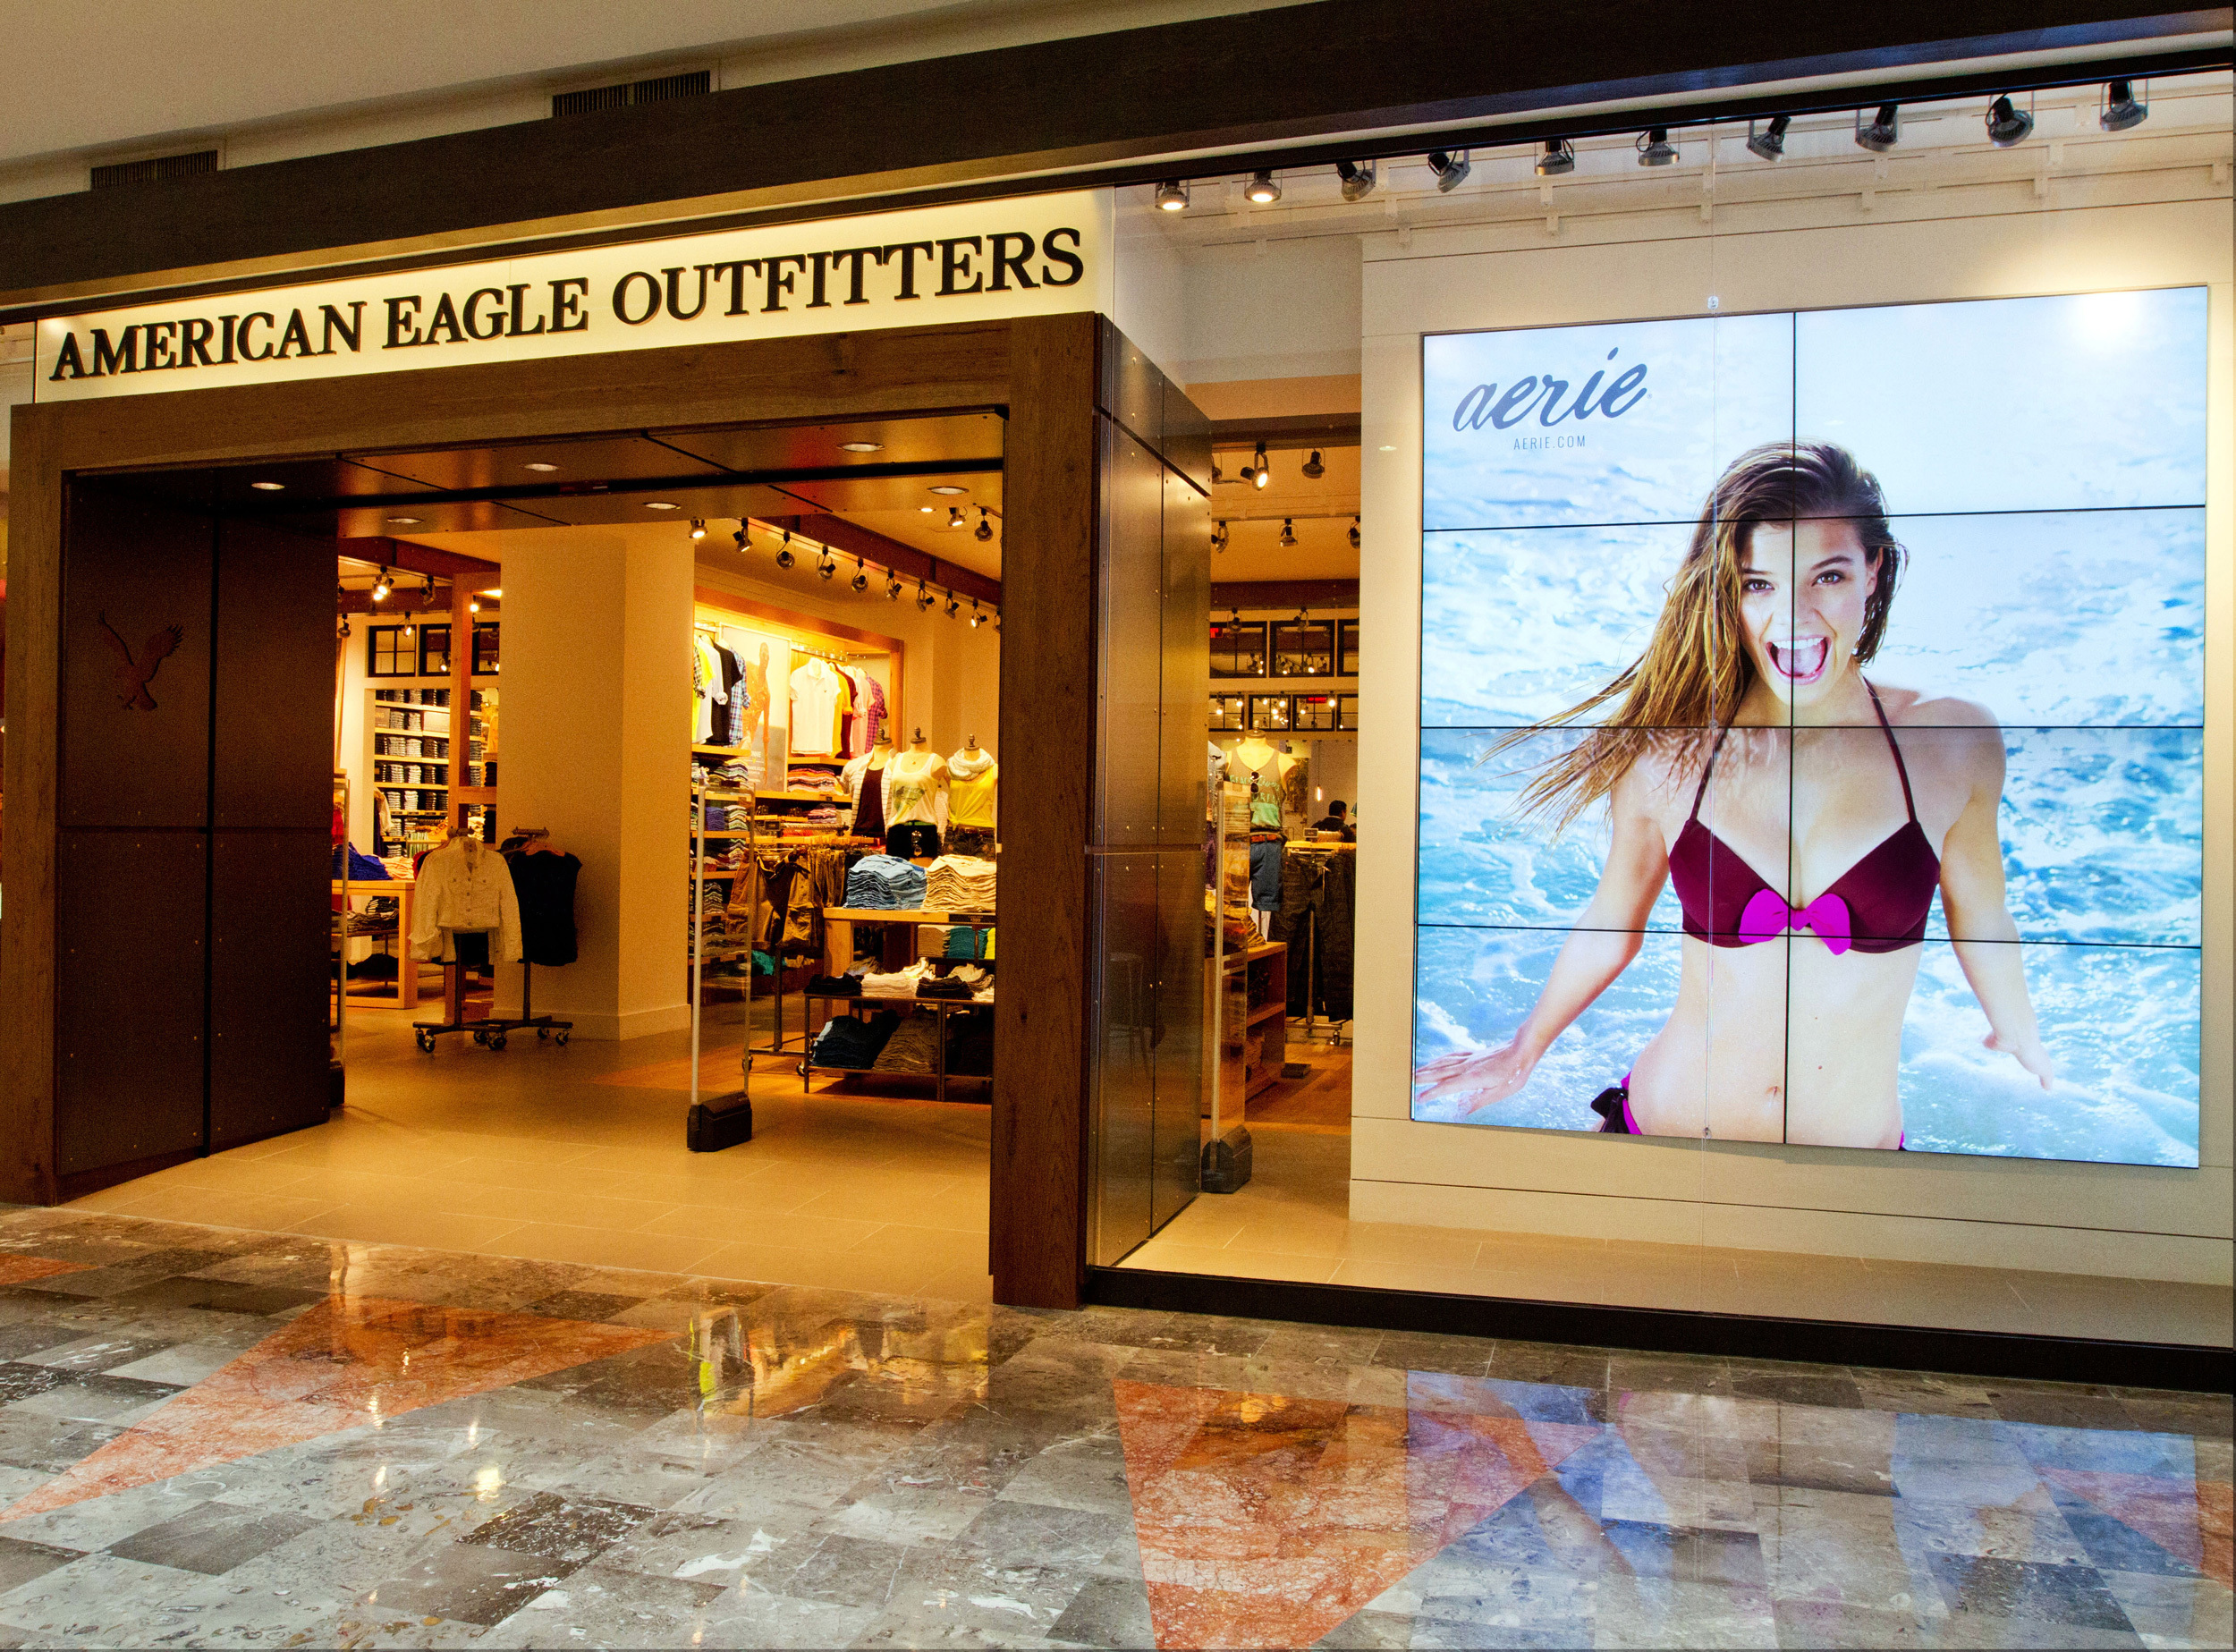 American Eagle Outfitters | The Mall at Millenia